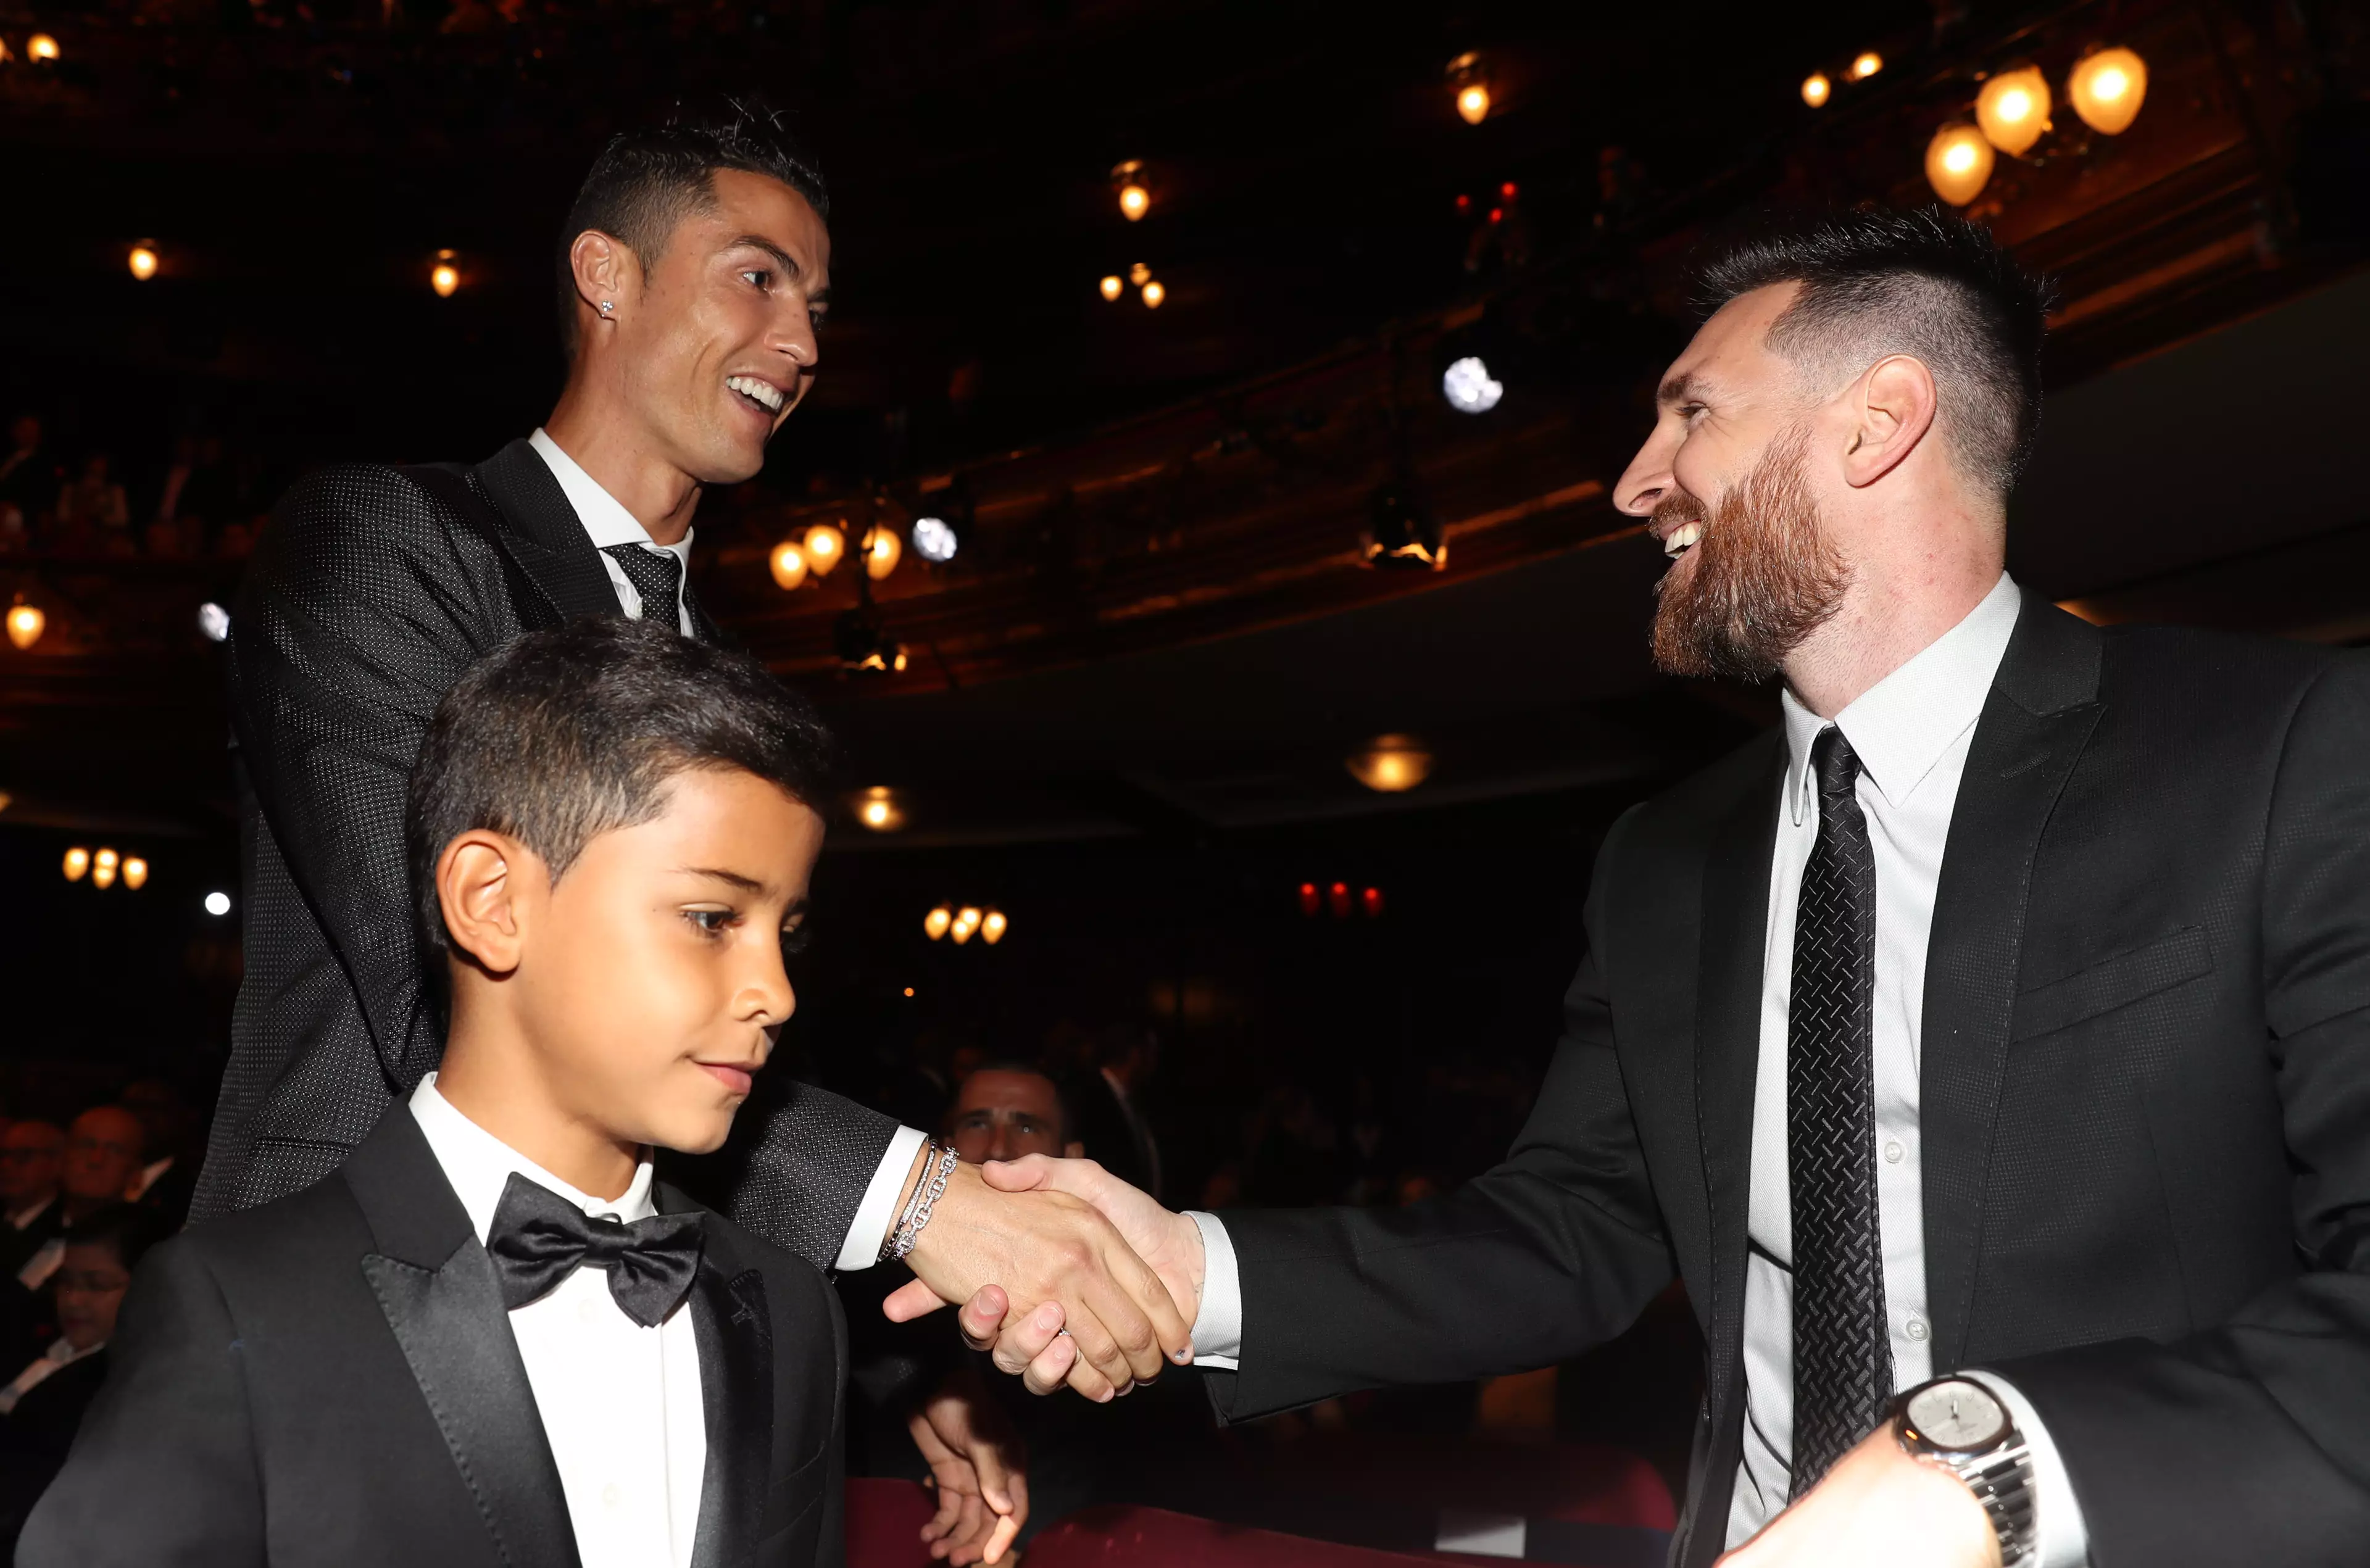 Messi and Ronaldo agree to never talk about which one of them is better. Image: PA Images